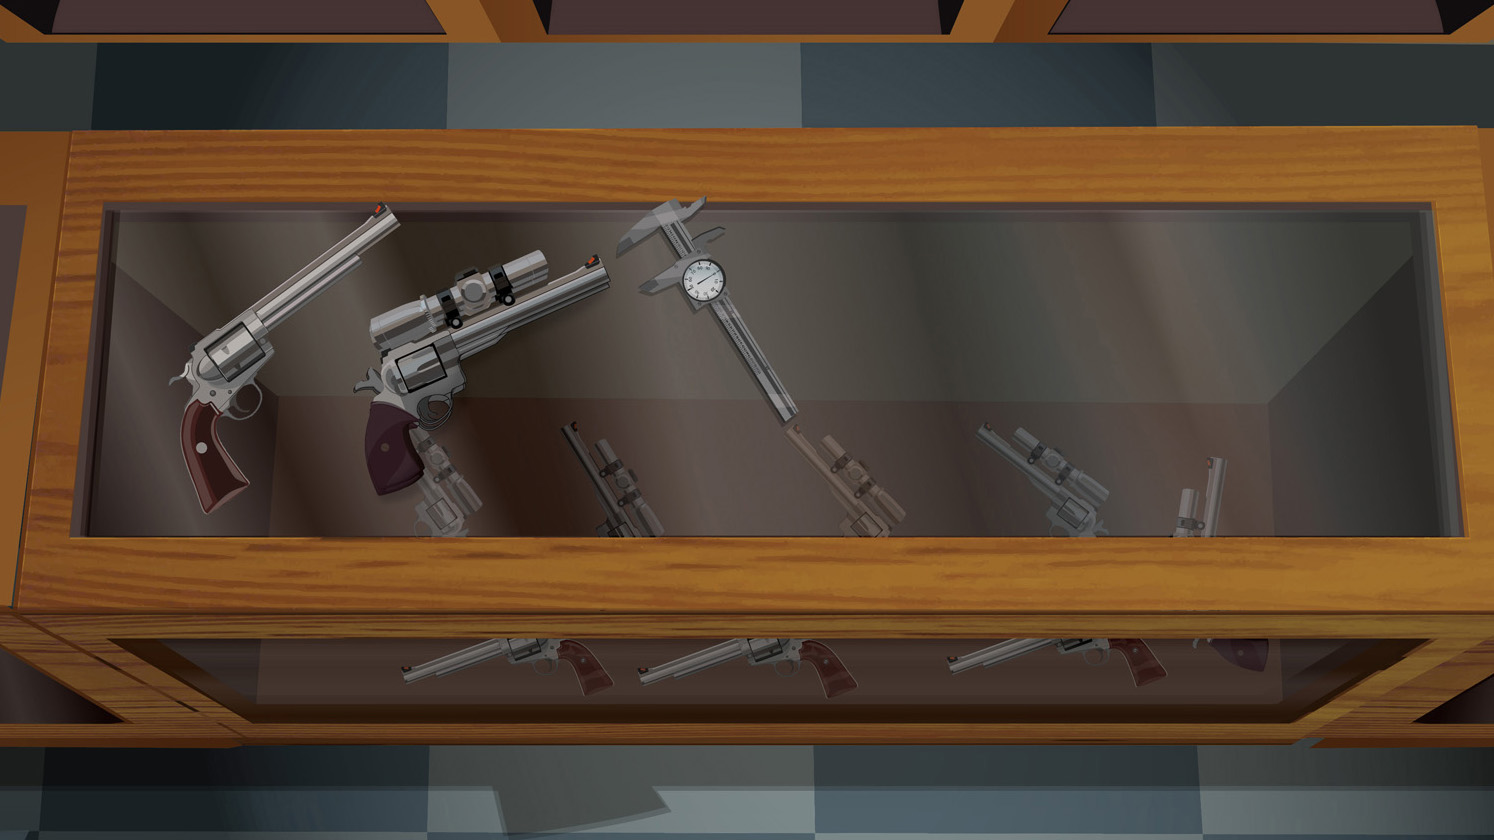 Illustration of a retail gun counter with  two handguns and a tool for measuring bore diameter on top.